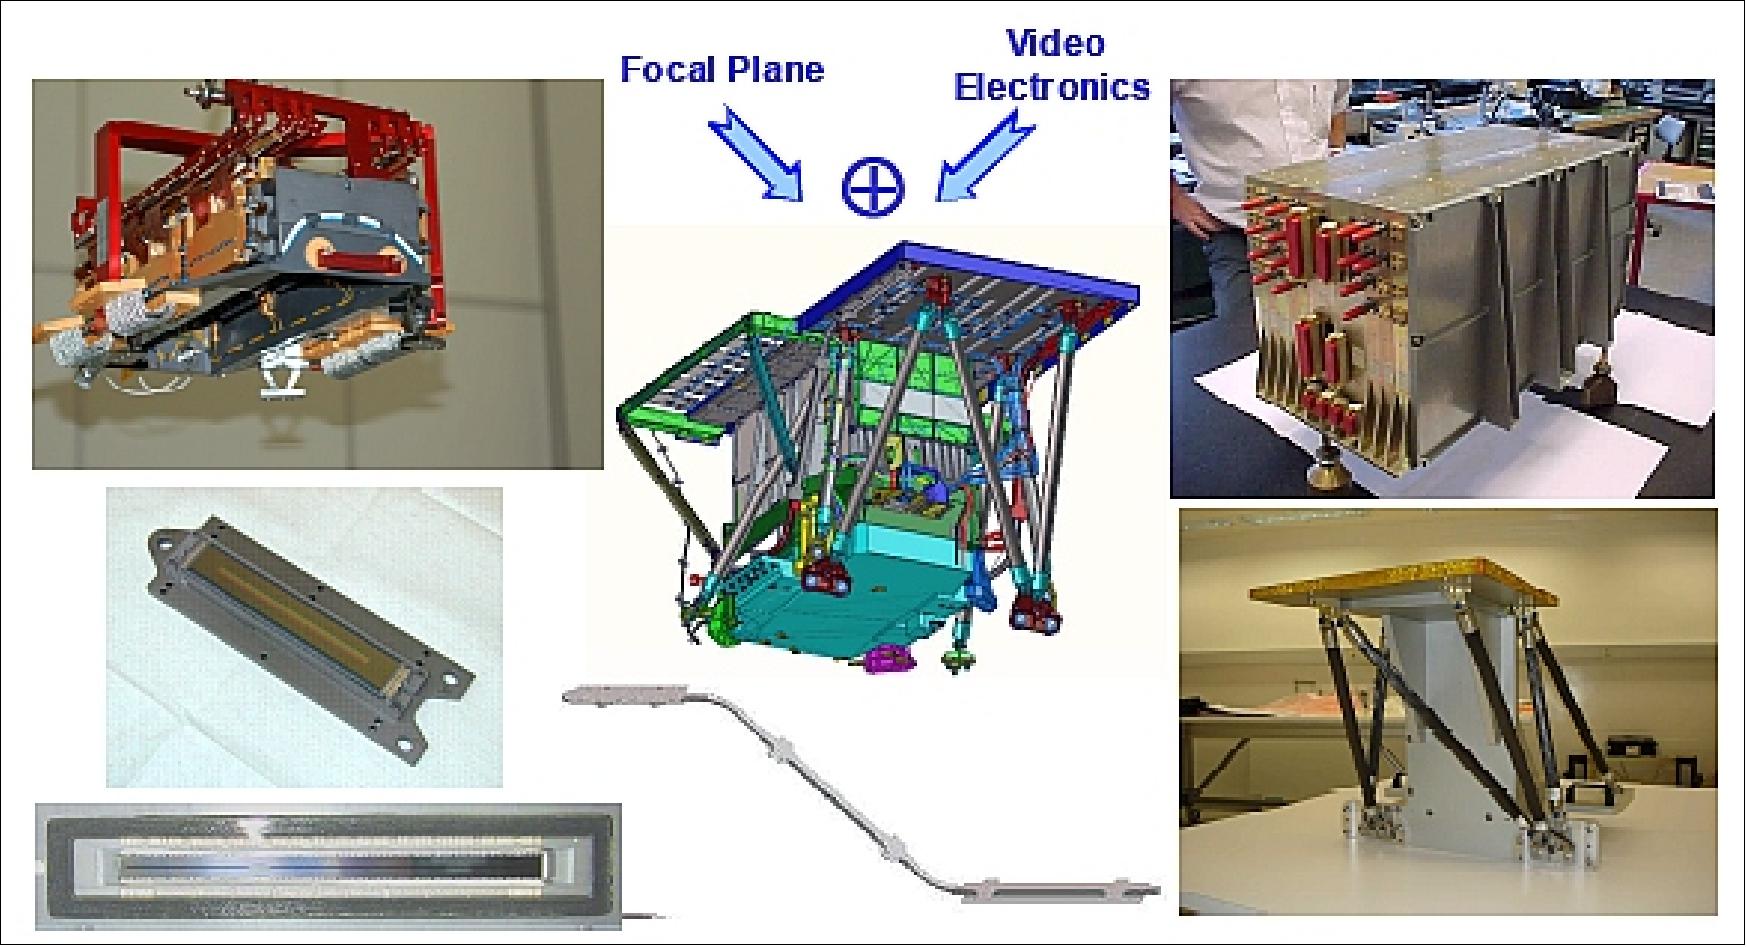 Figure 44: Overview of elements in the integrated detection unit (image credit: TAS)